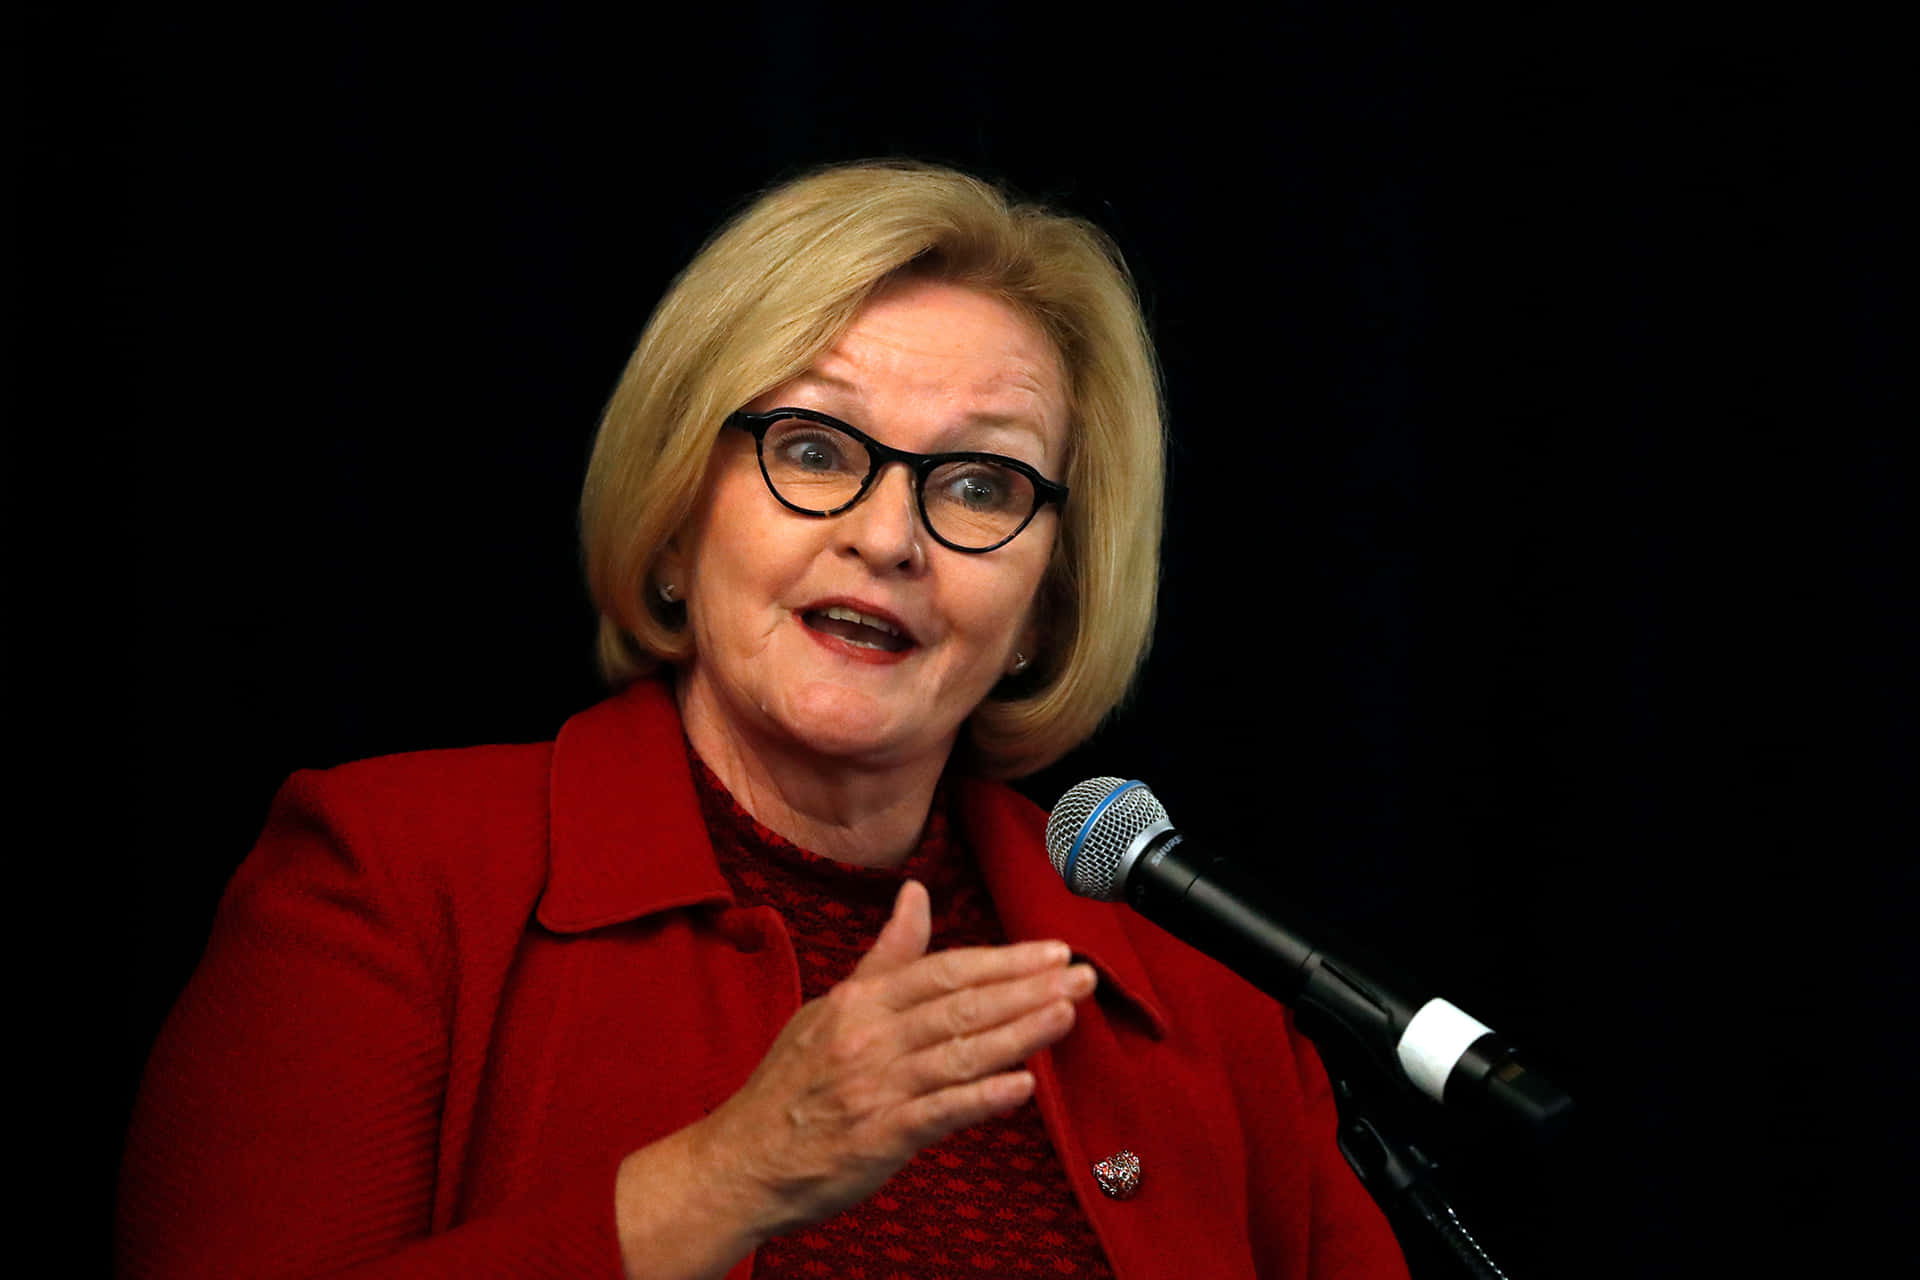 Claire Mccaskill Gesturing With Microphone Background